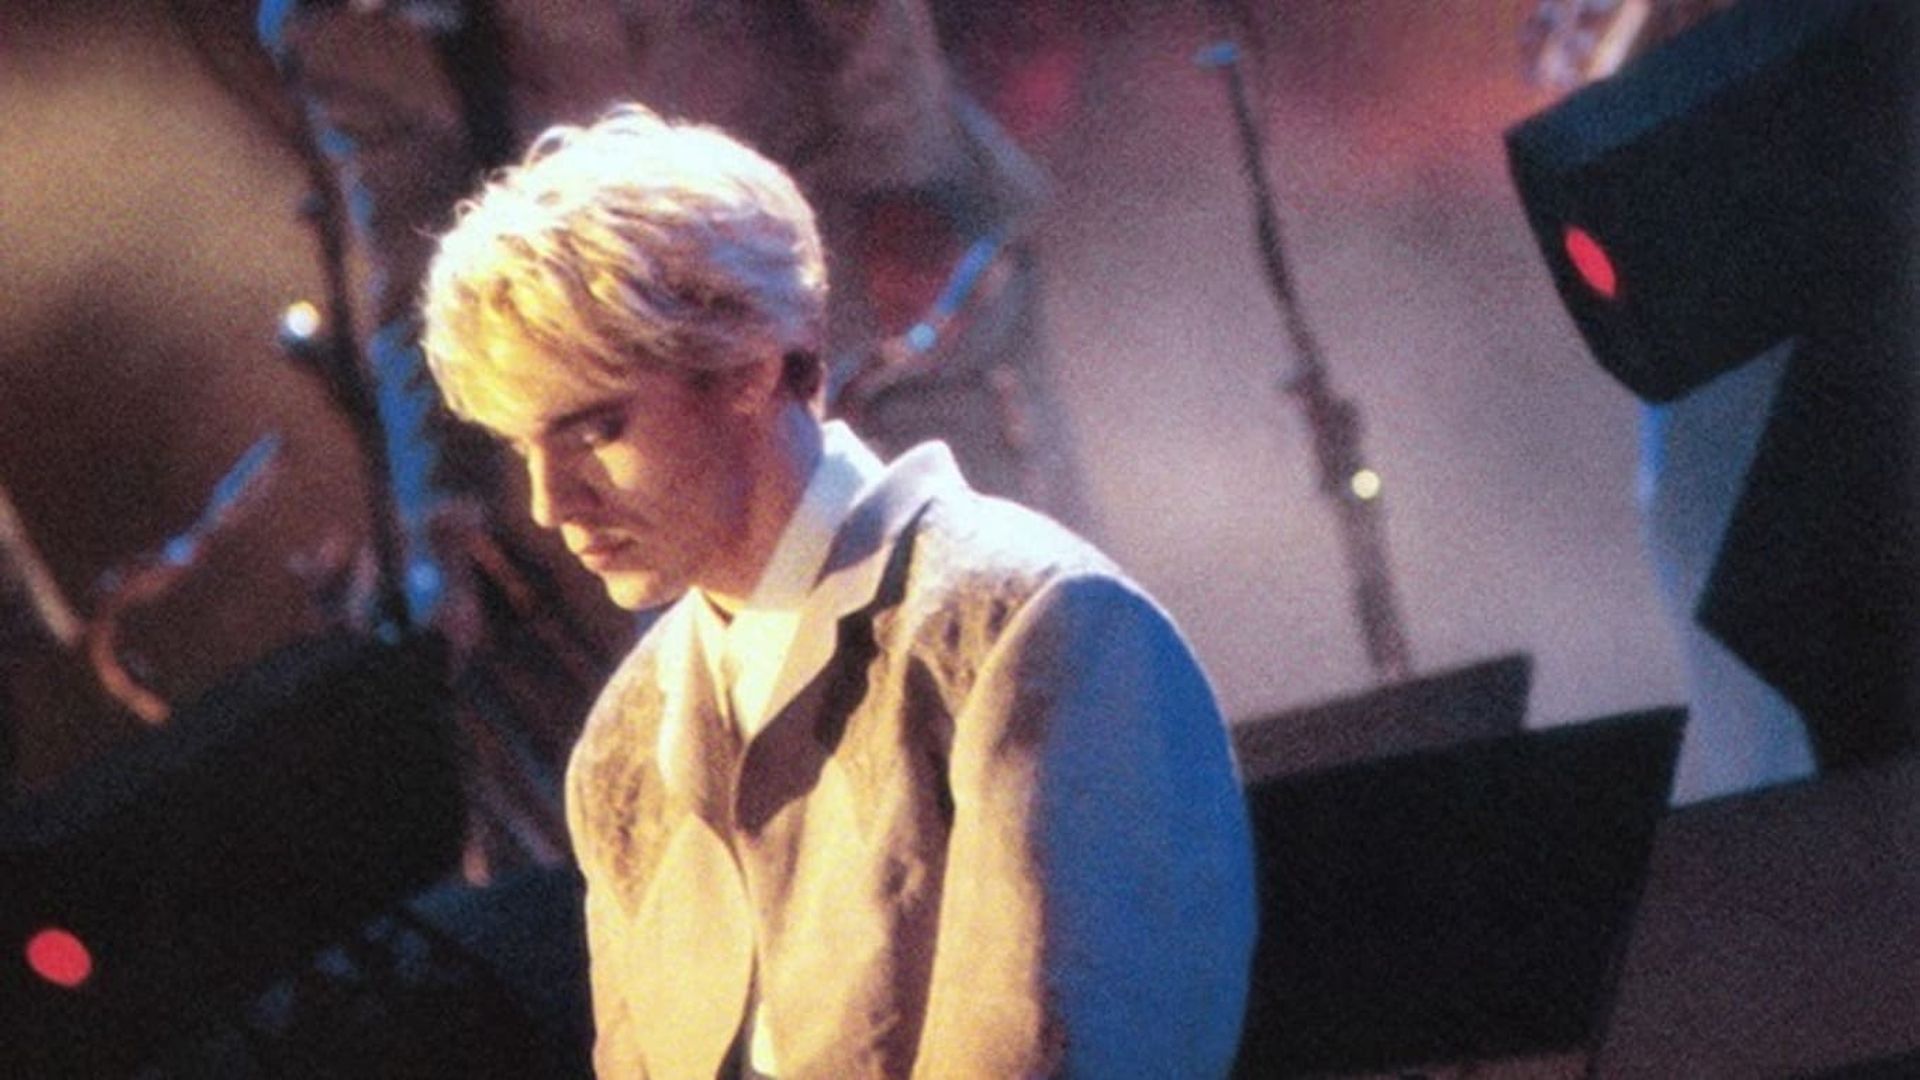 Working for the Skin Trade: Duran Duran background